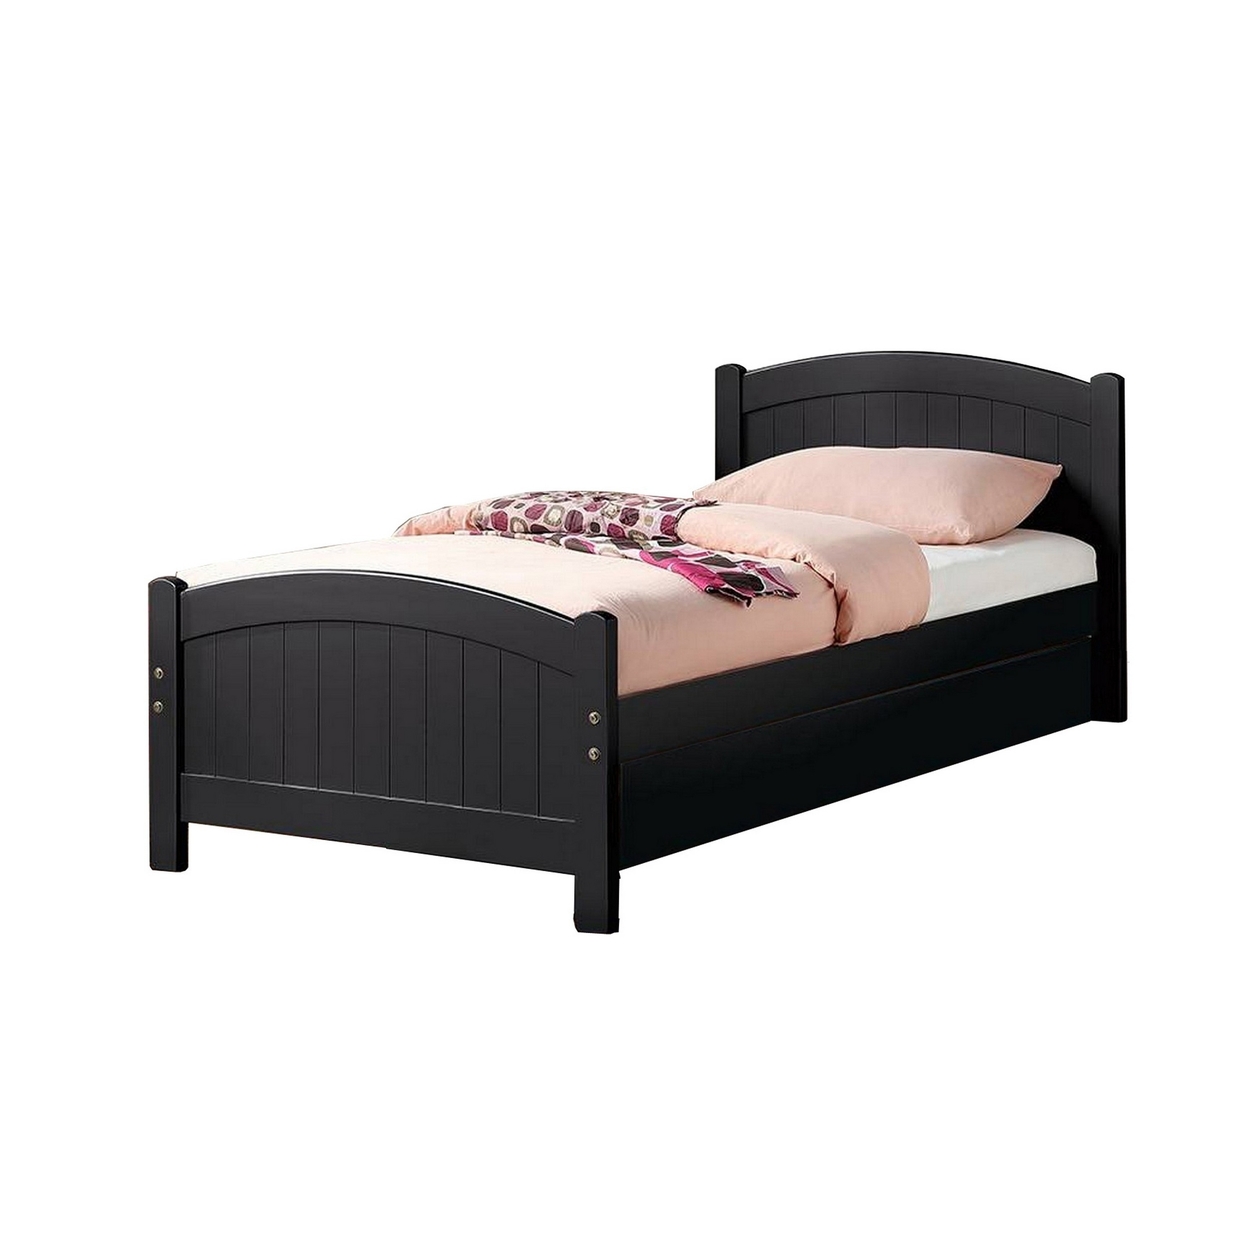 Shov Twin Size Trundle Bed, Arched Headboard, Vertical Accents, Black Wood- Saltoro Sherpi